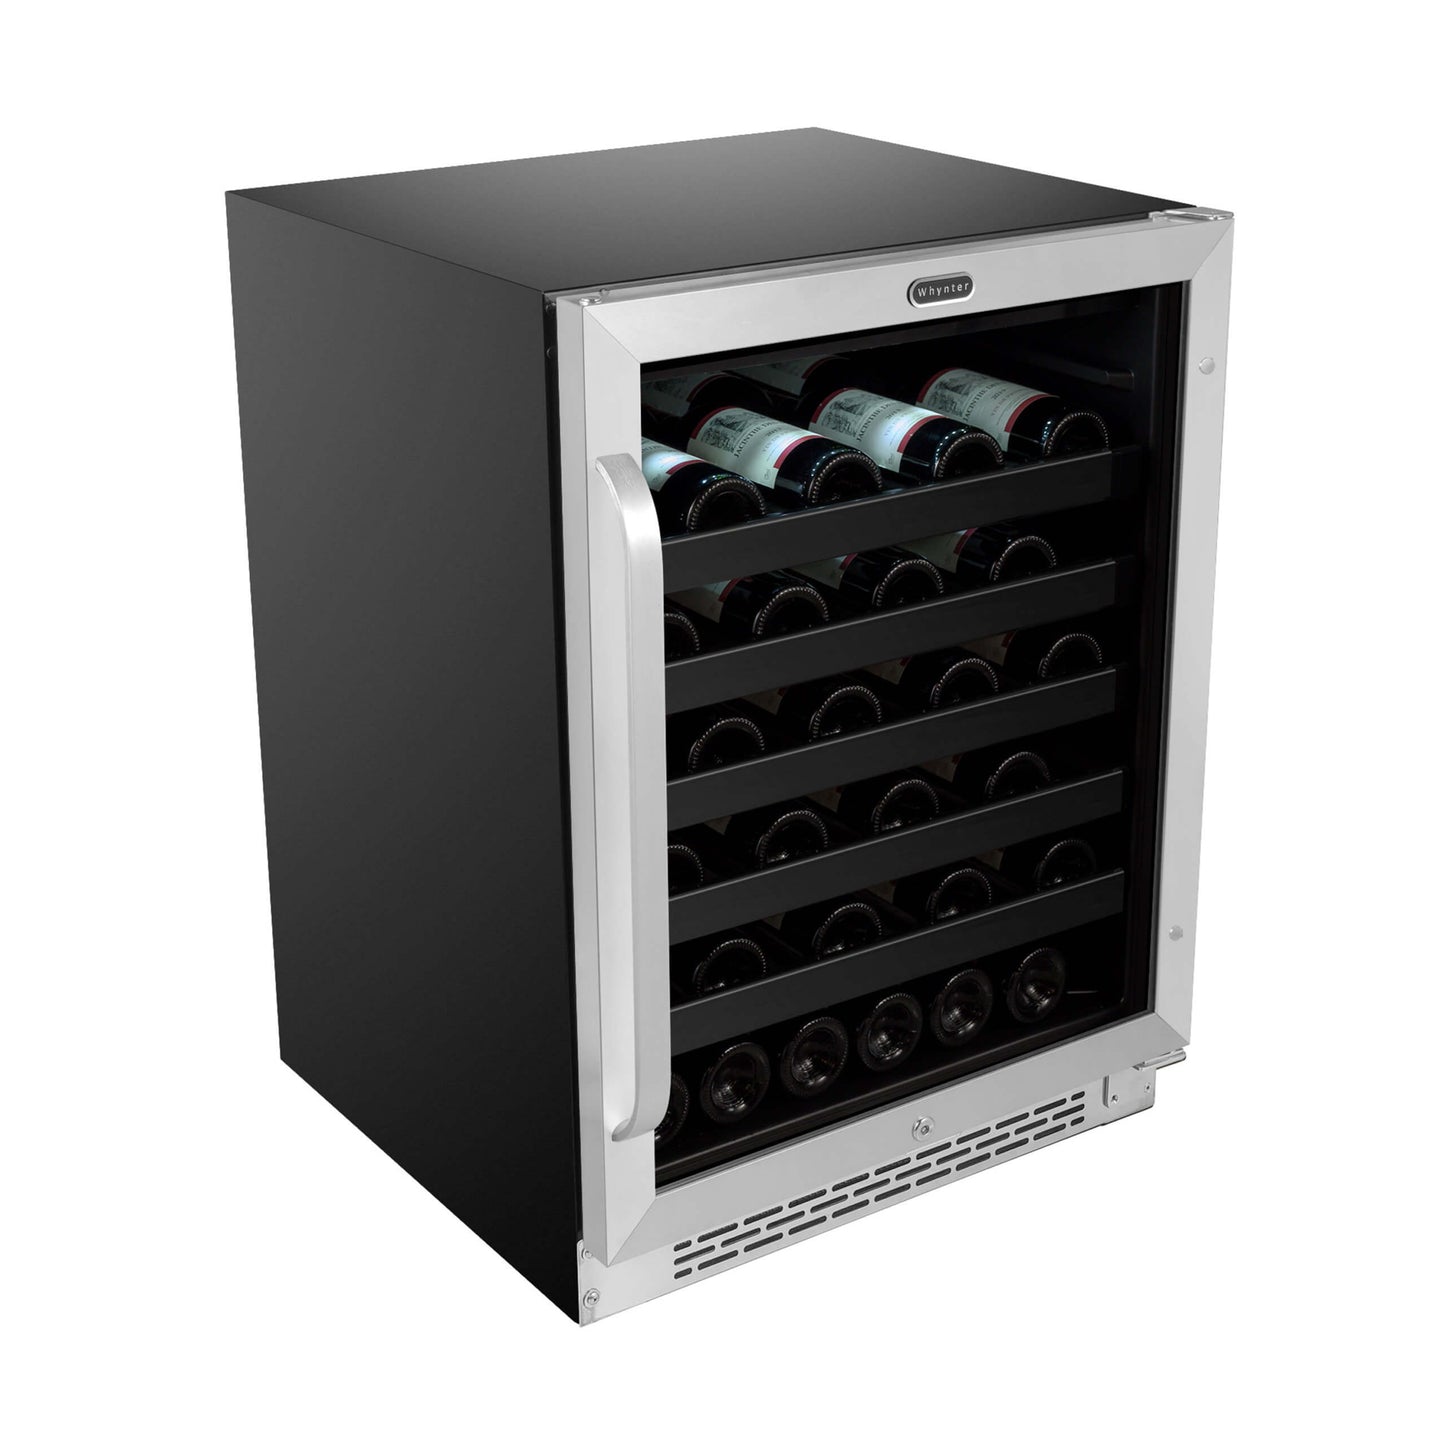 Whynter Wine Refrigerator Whynter BWR-408SB 24 inch Built-In 46 Bottle Undercounter Stainless Steel Wine Refrigerator with Reversible Door, Digital Control, Lock, and Carbon Filter